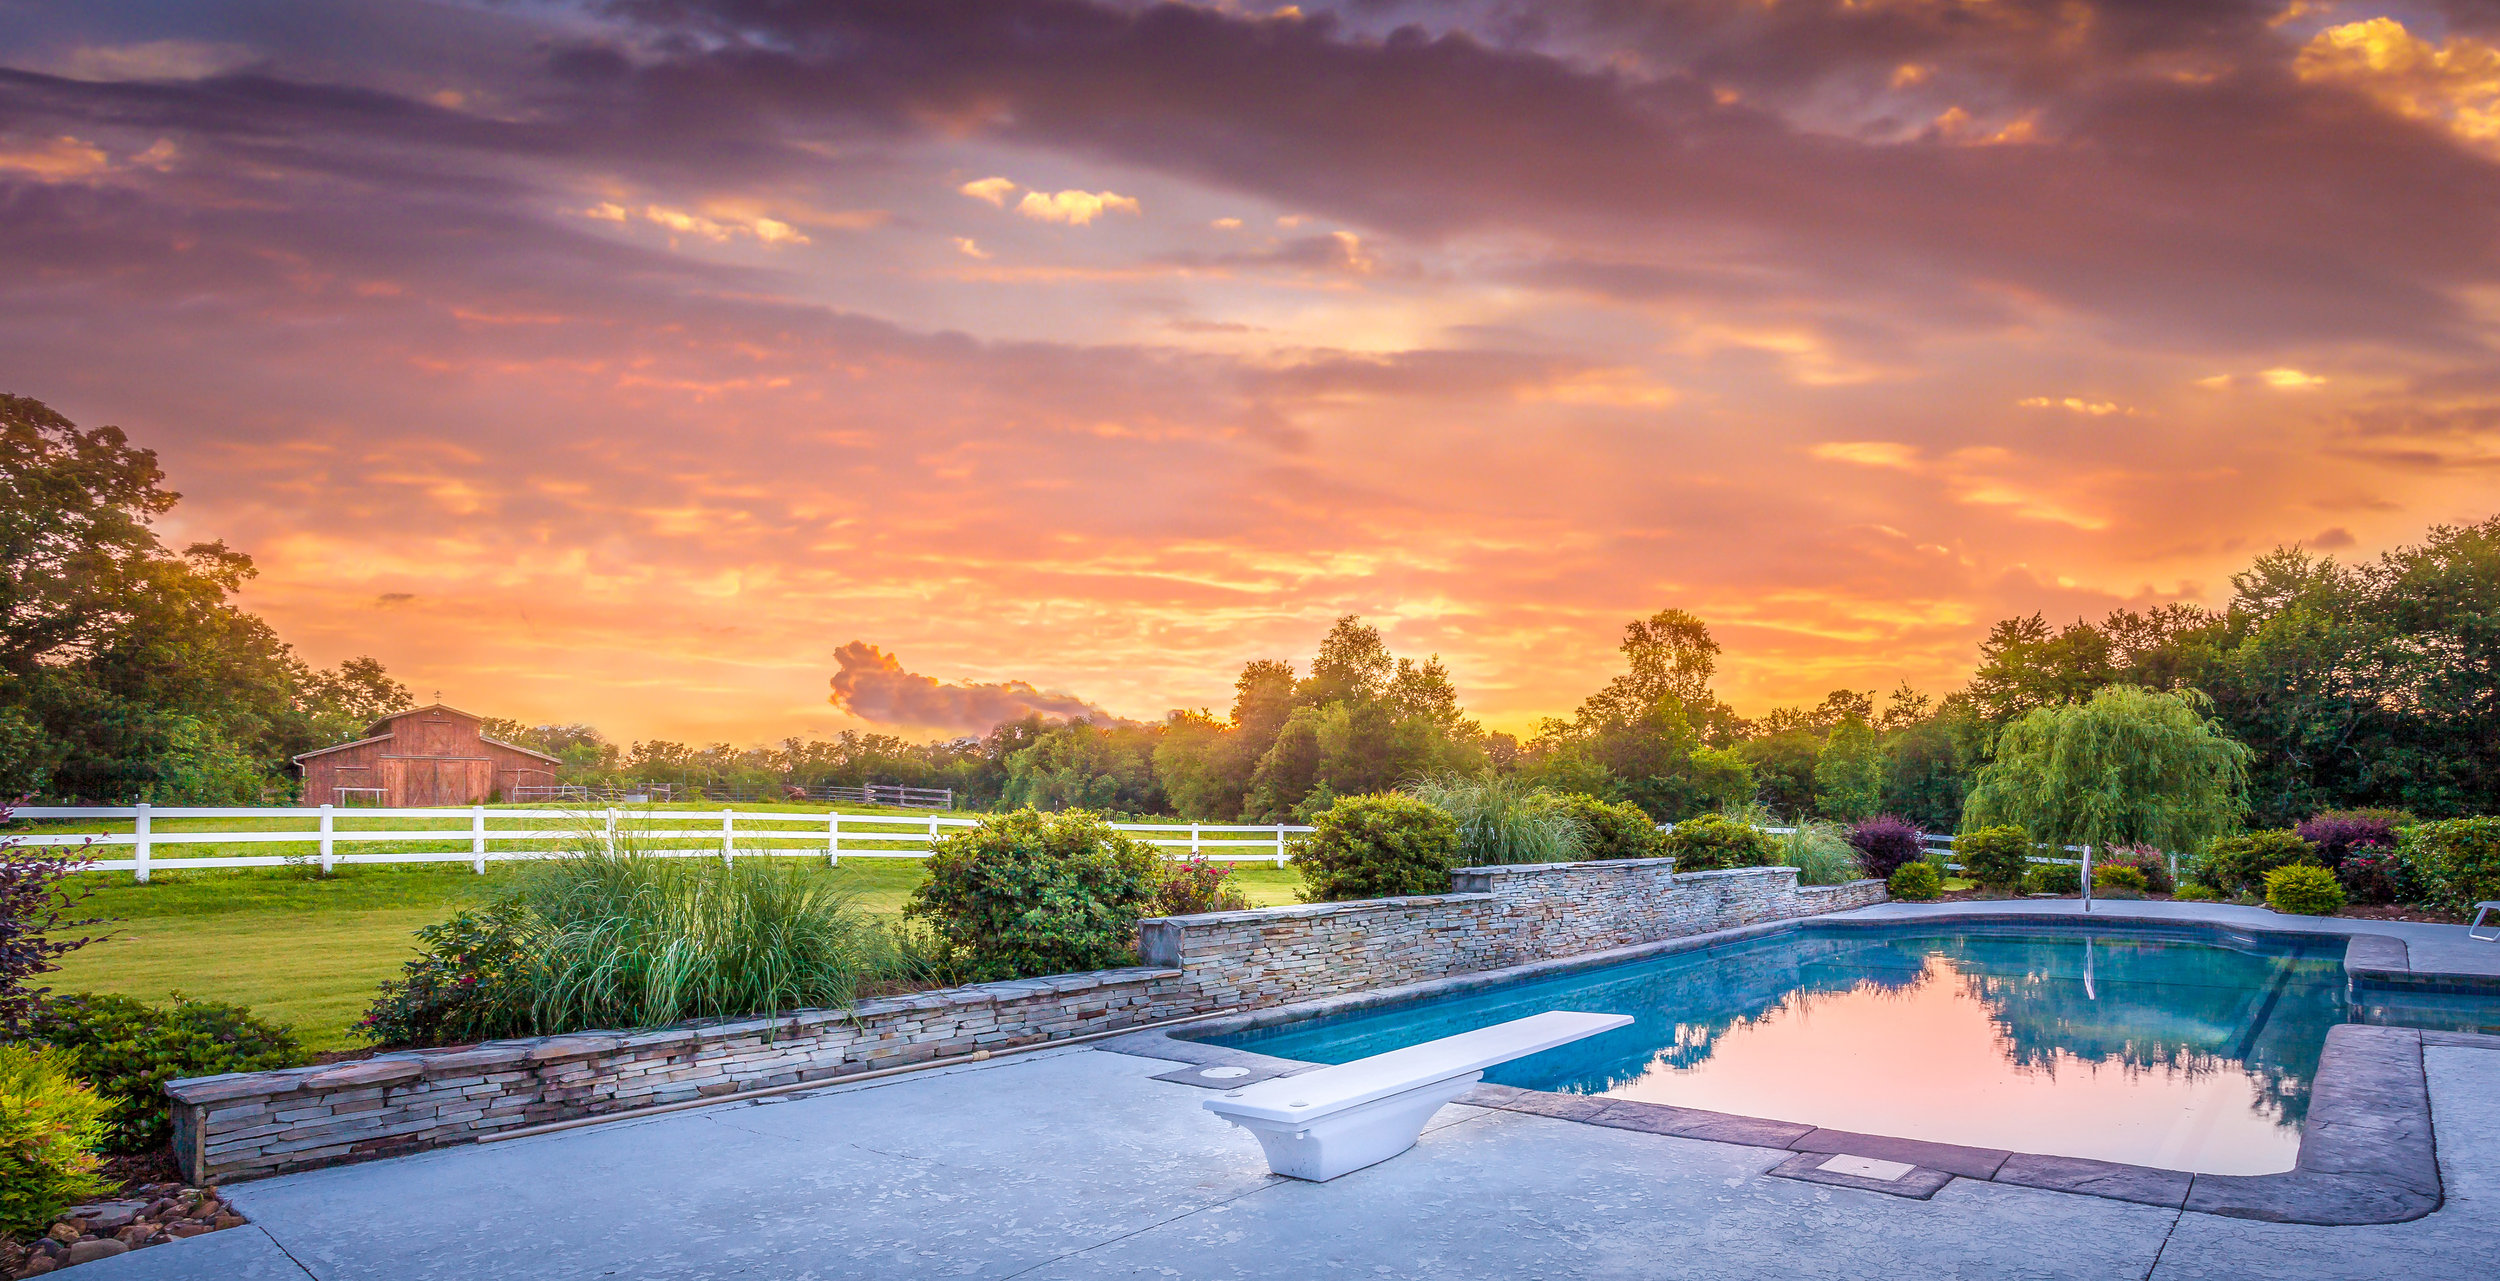 Farm Pool at Sunset by 161 Photography